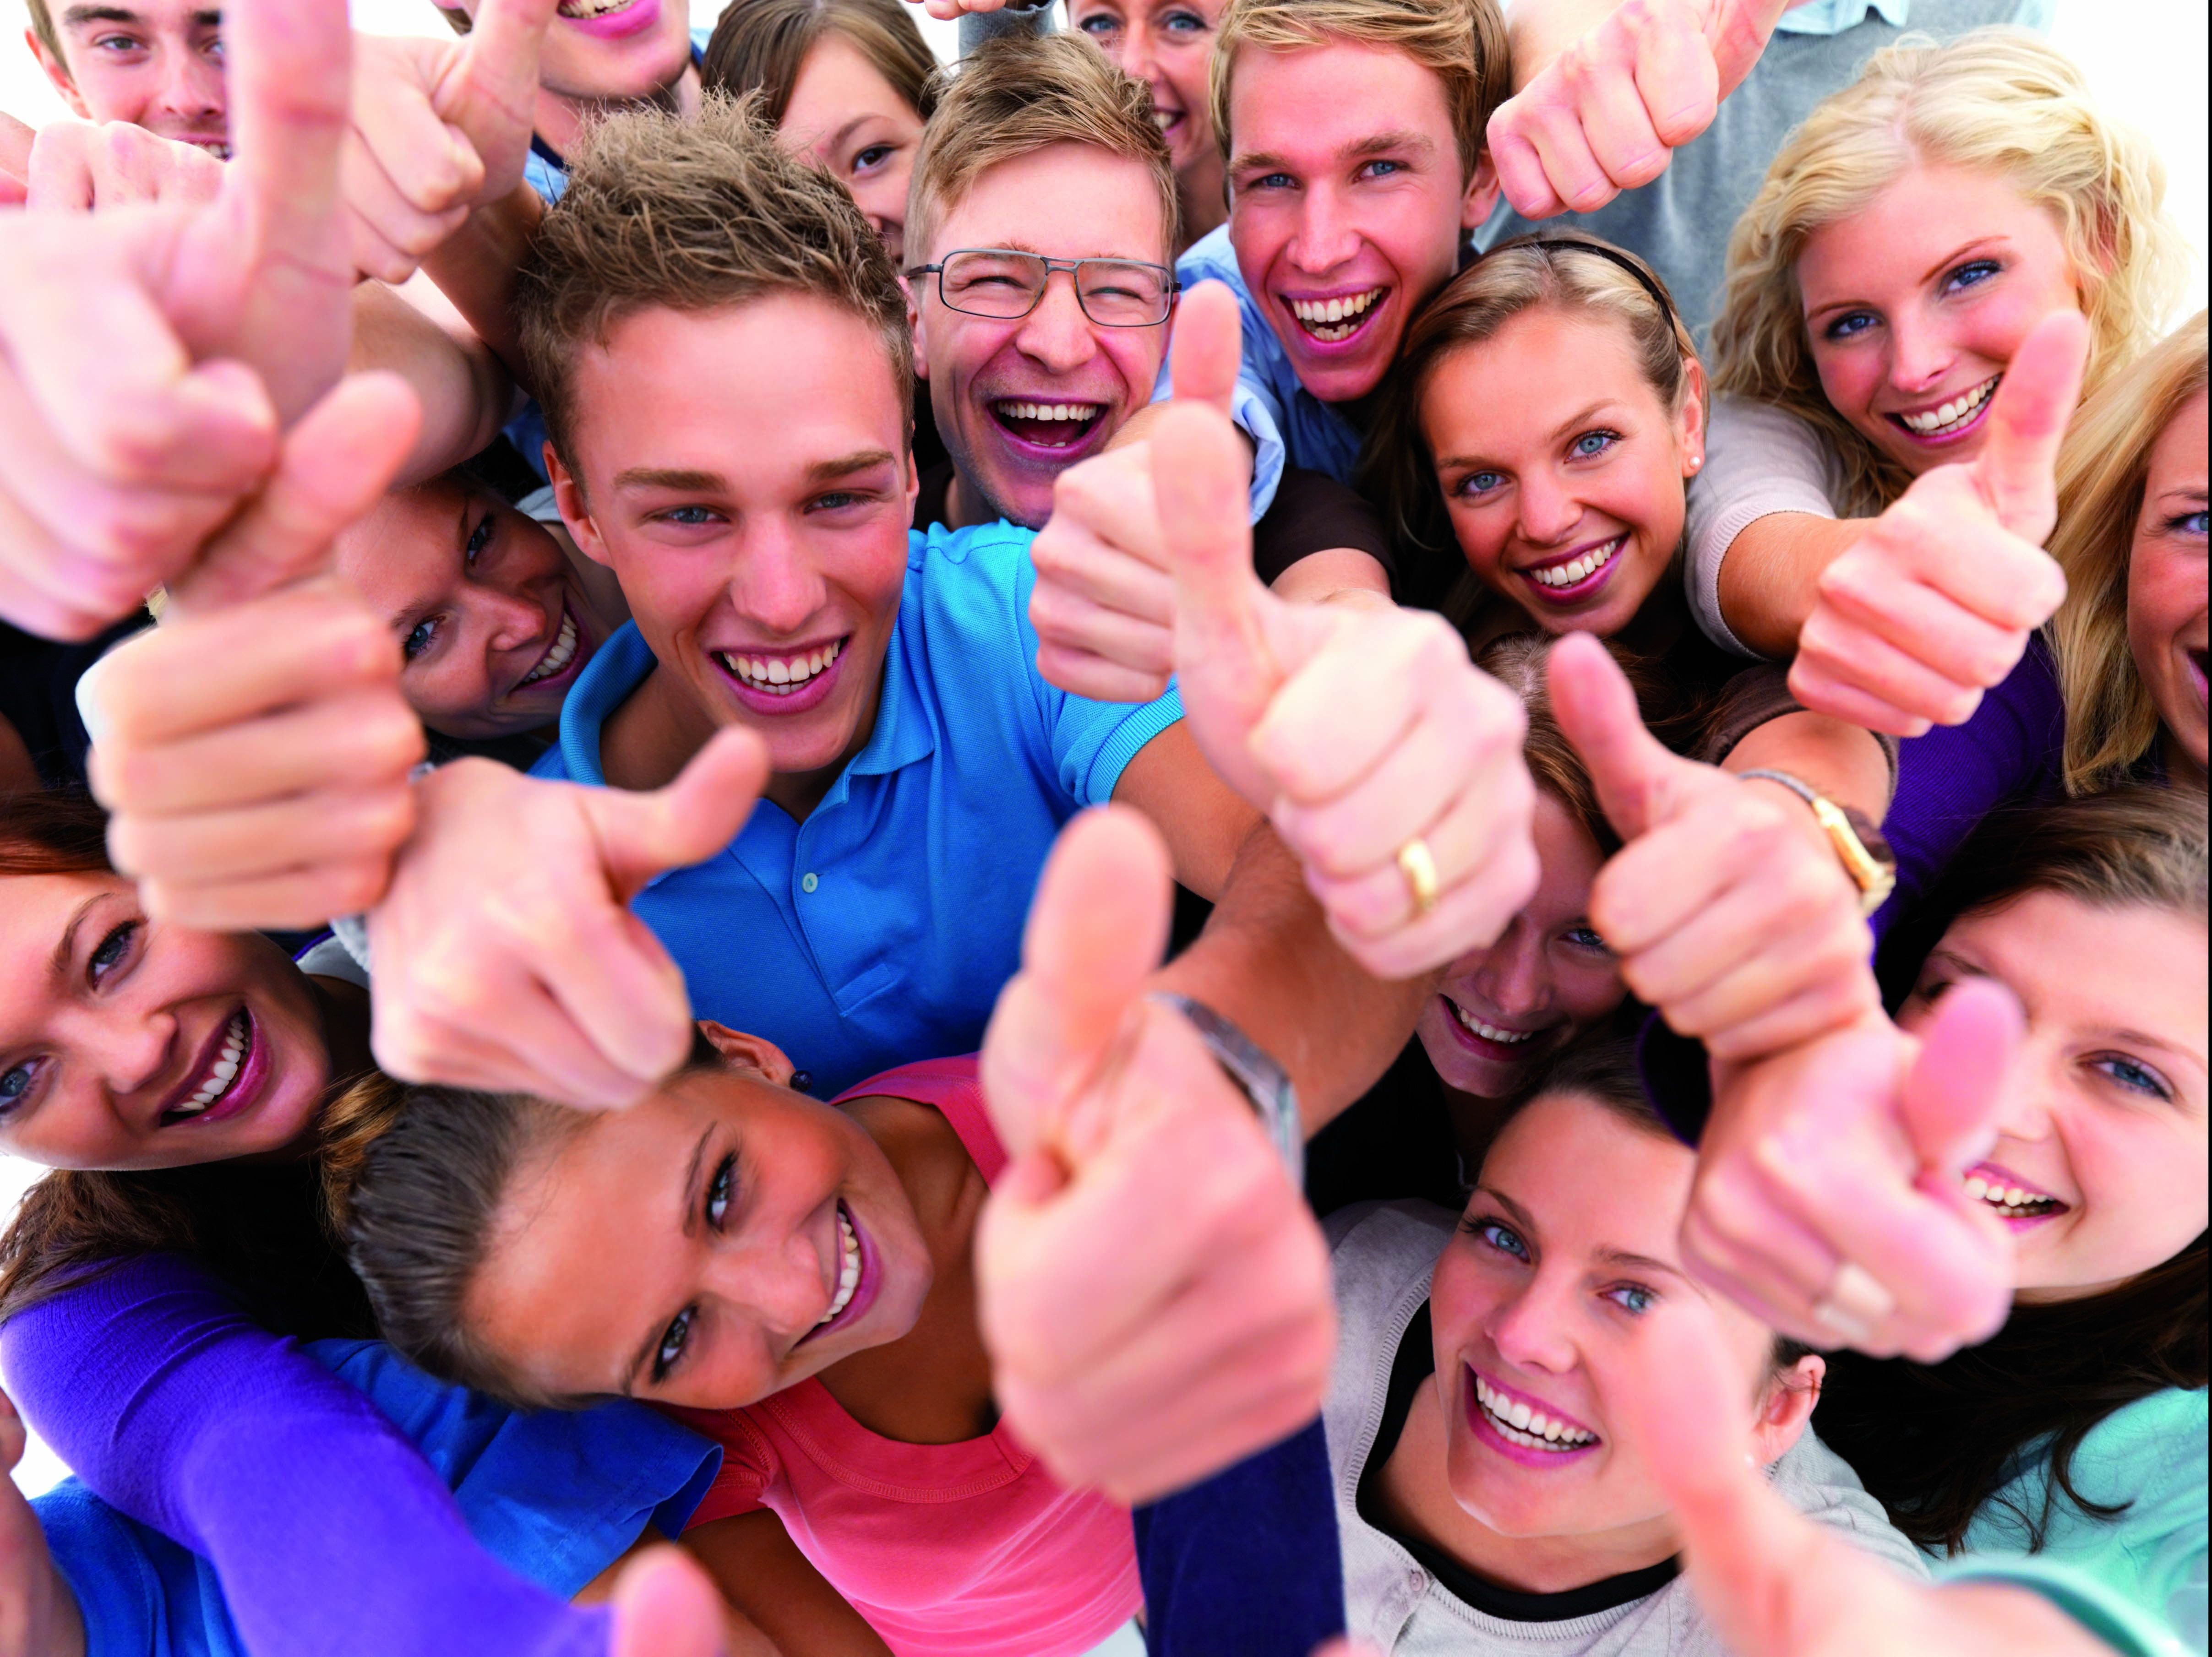 Top view portrait of men and women standing together and showing thumbsup sign